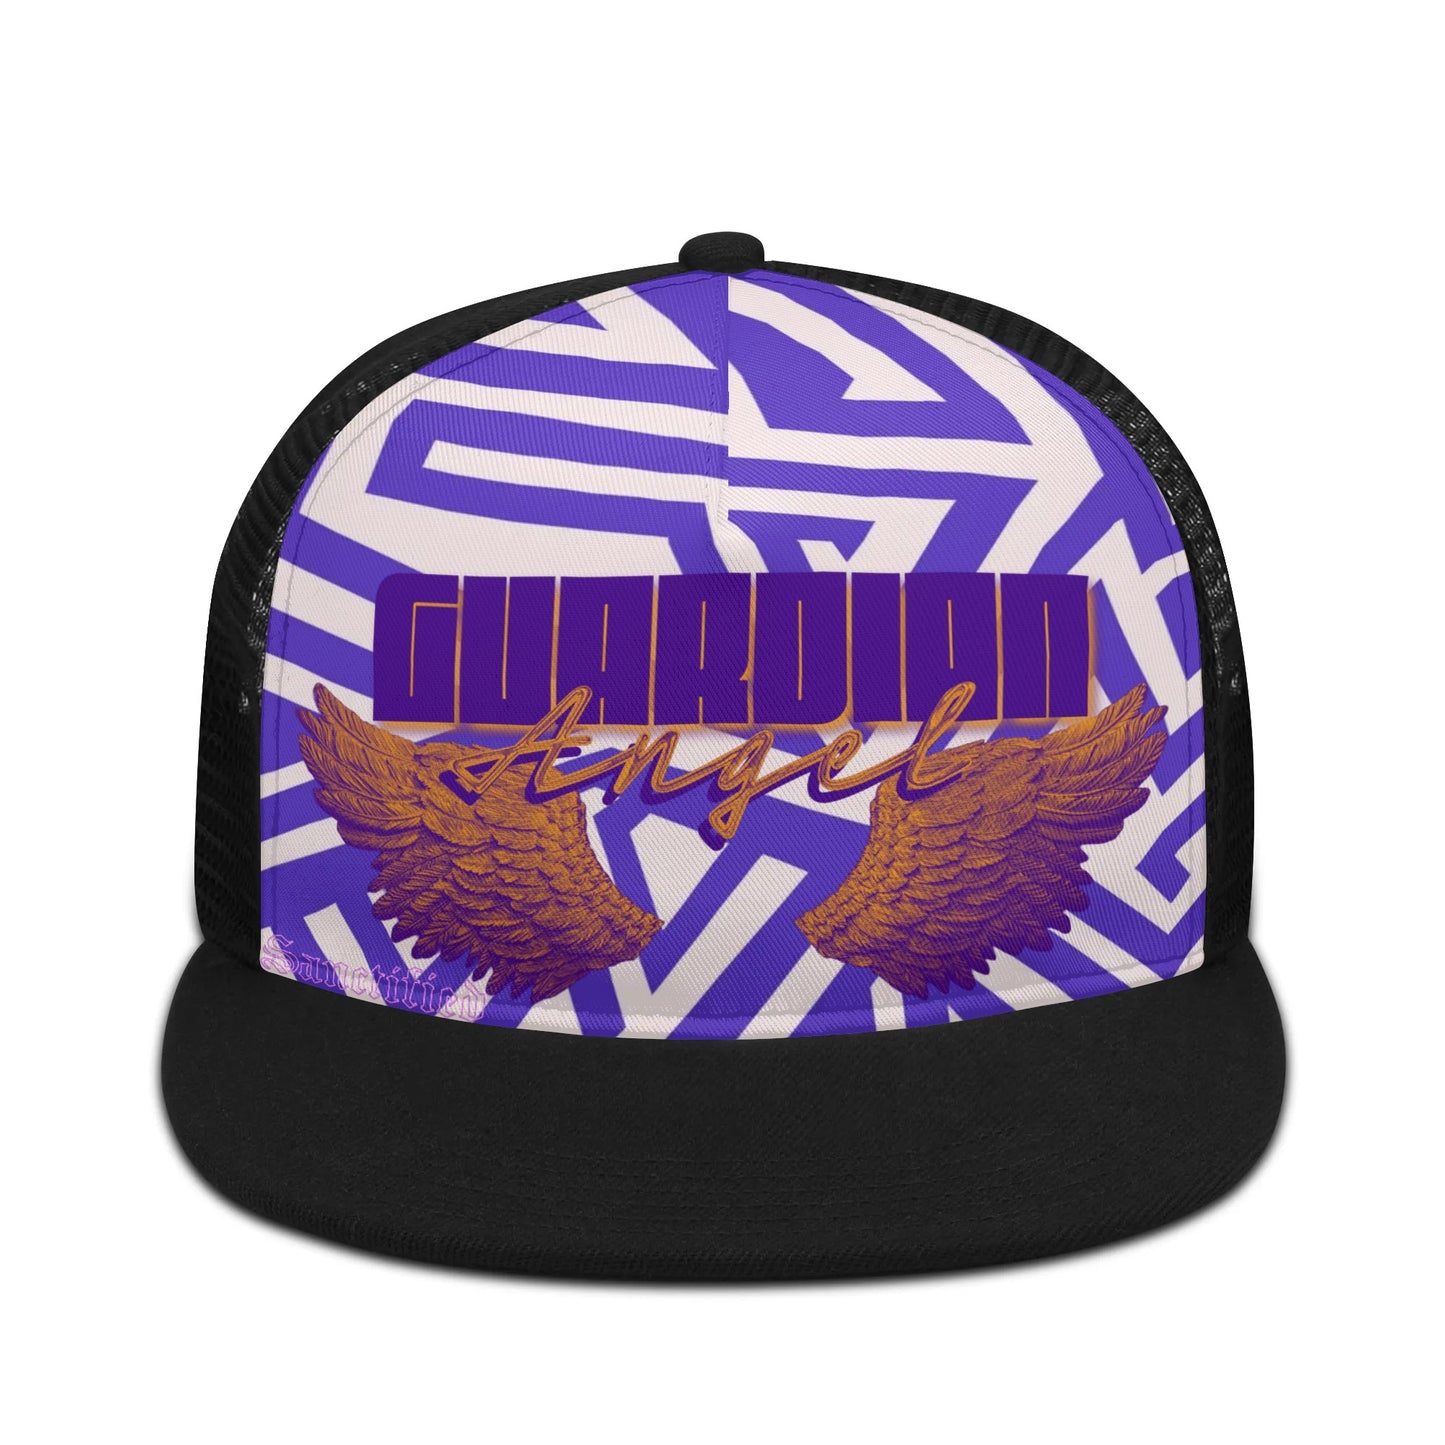 GUARDIAN ANGEL- Front Printing Adjustable Snapback Trucker Hat, Free Shipping